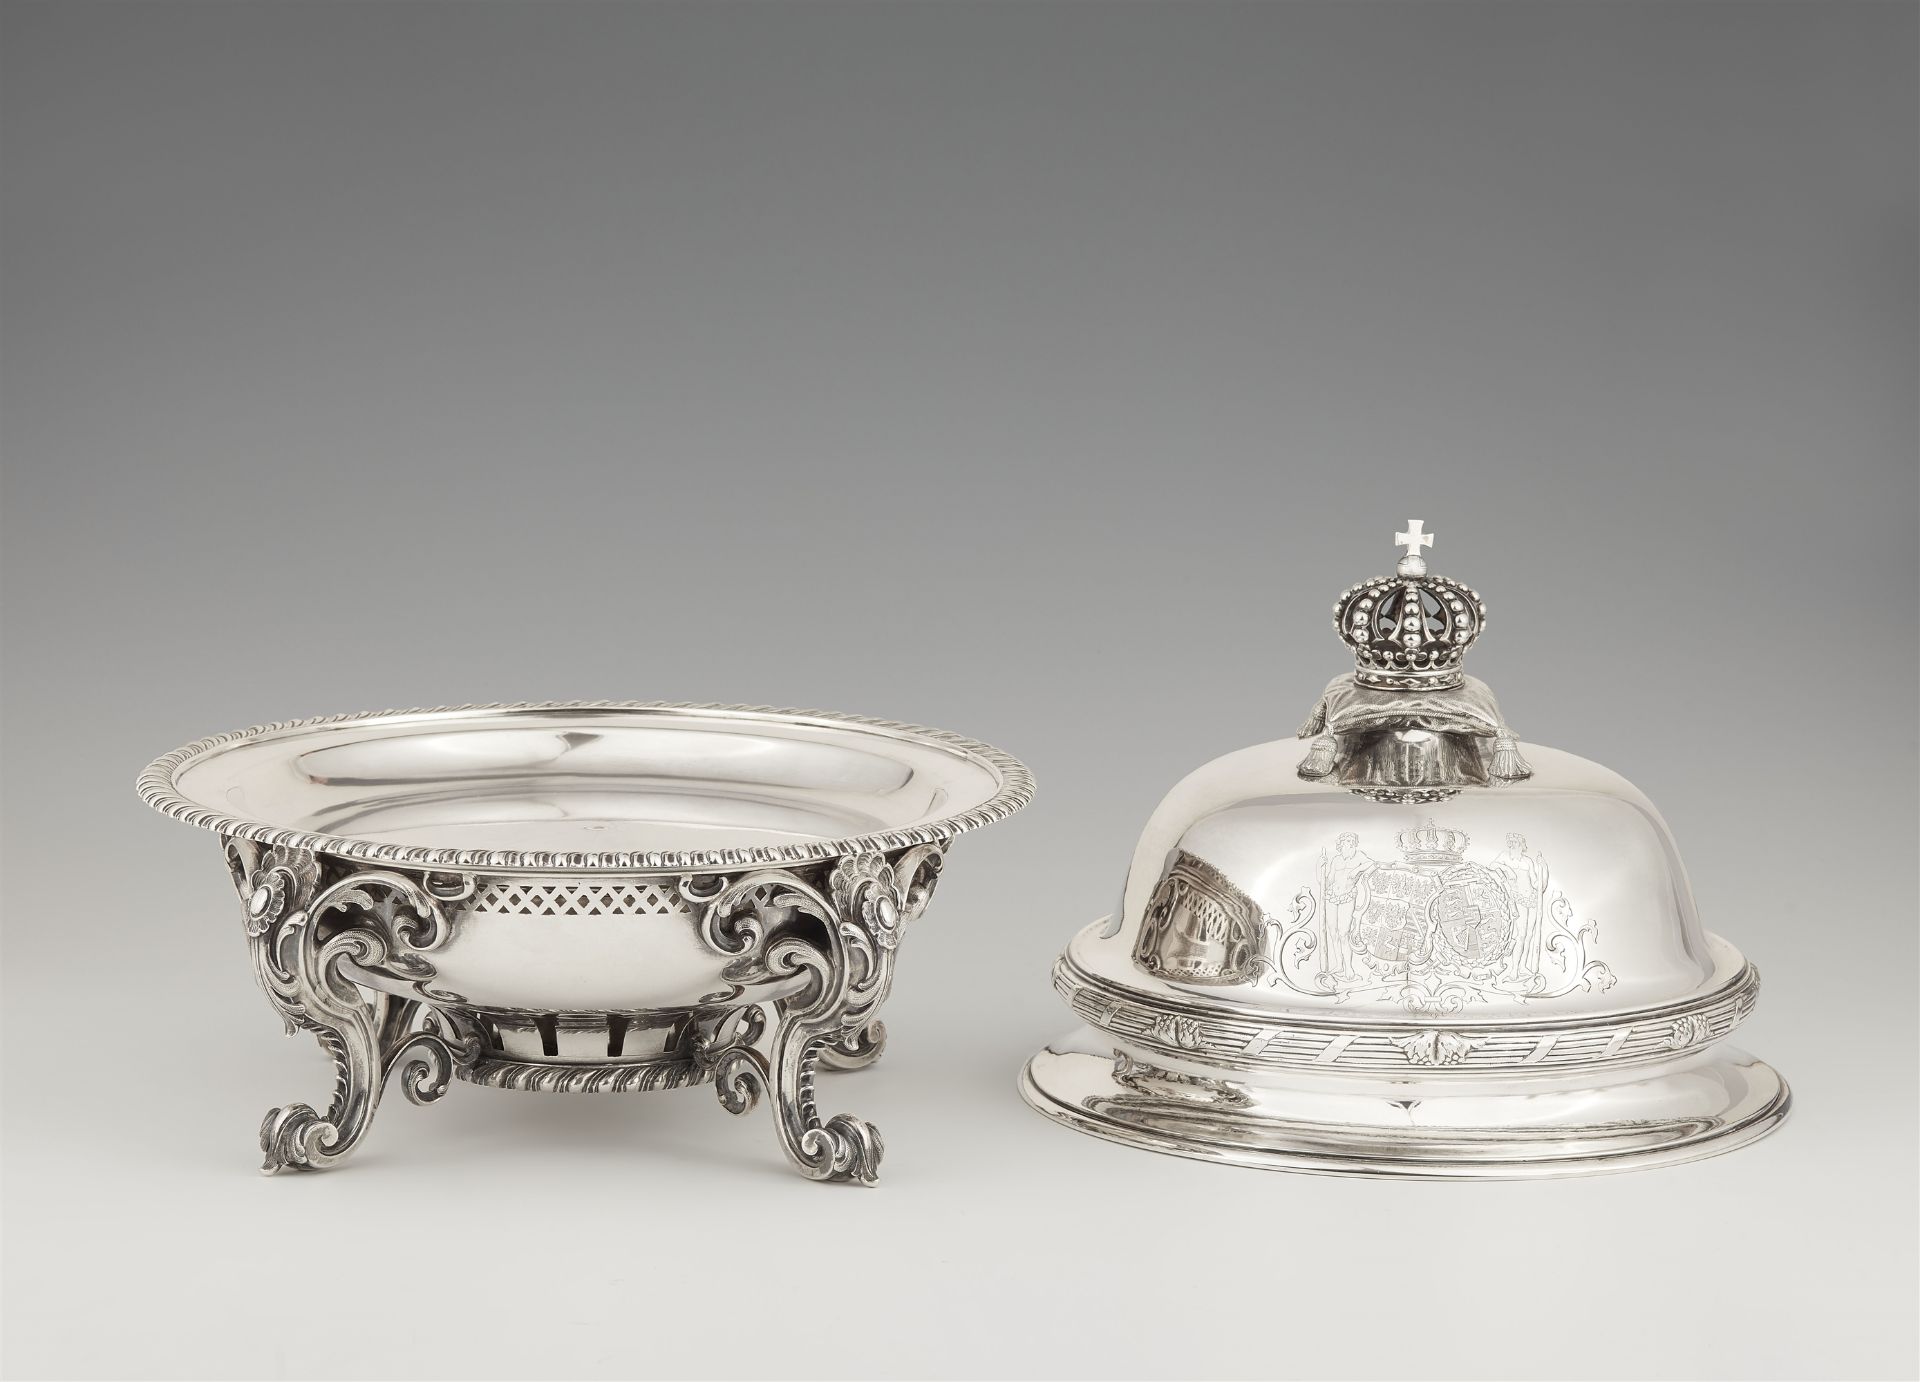 A silver rechaud and cloche made for Prince Frederick William and Princess Victoria of Prussia - Image 2 of 5